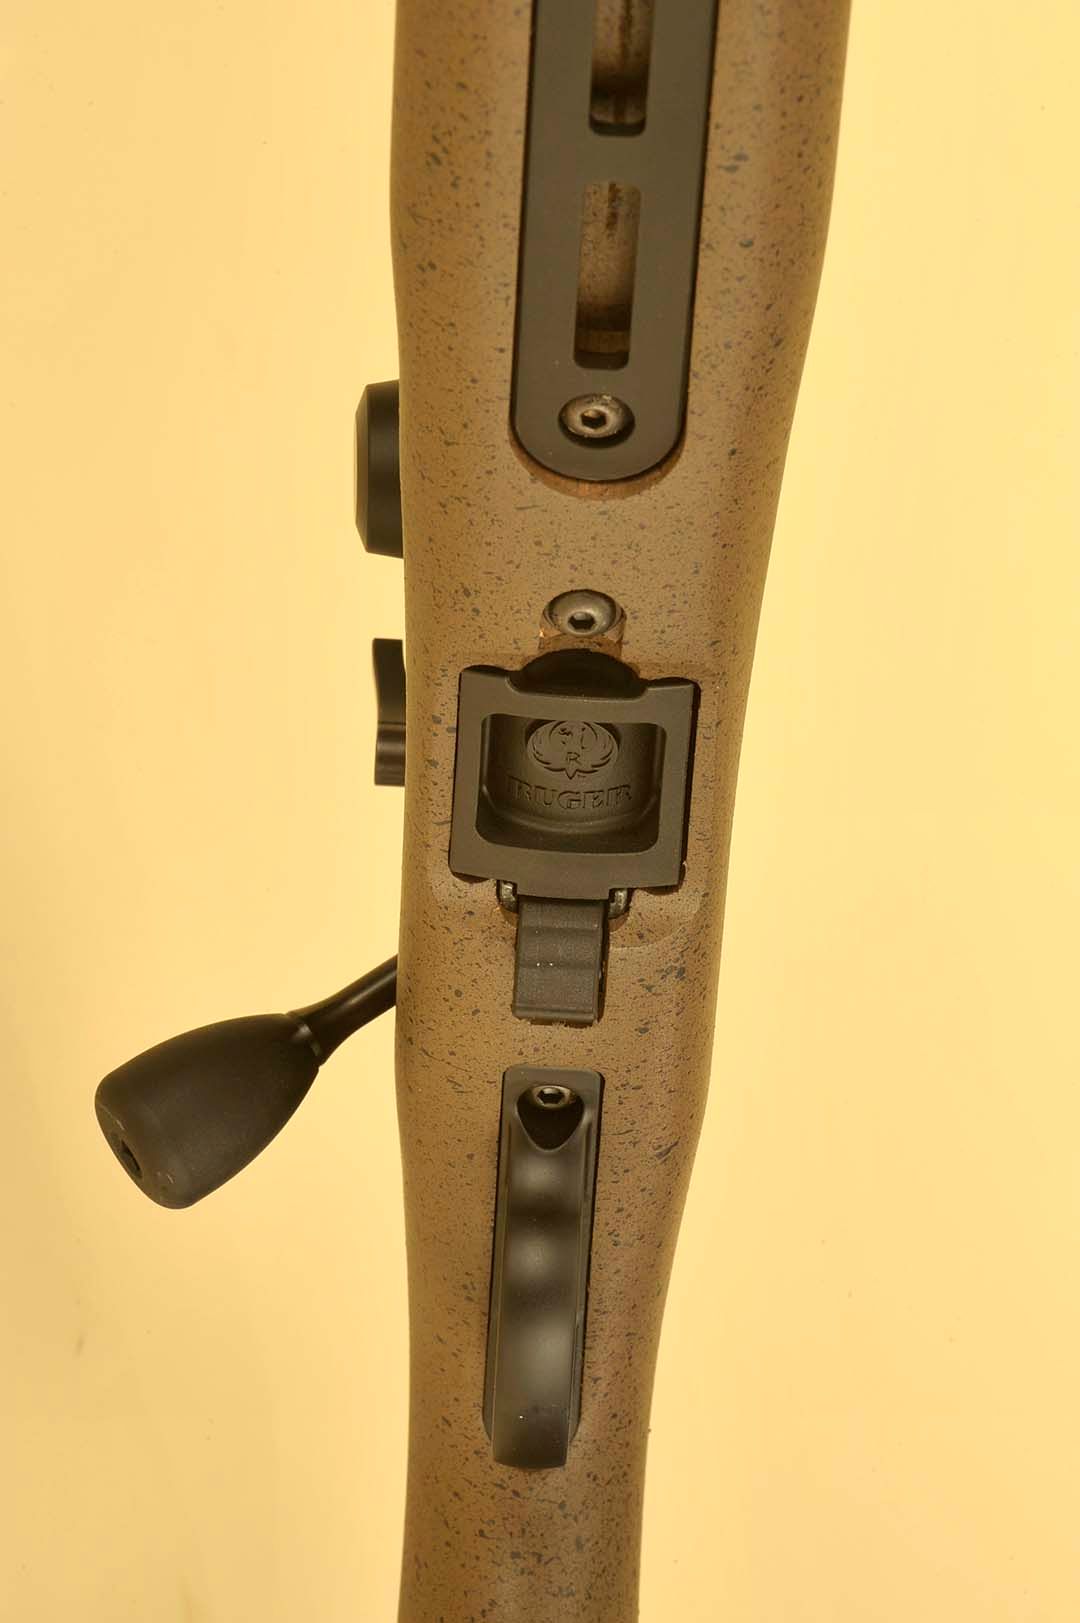 From the underside of the gun, readers can see, from top to bottom the M-Lok rail, flush mounted BX-1 rotary magazine and trigger guard. Everything was installed with precision and in tune with the overall mission of the rifle.